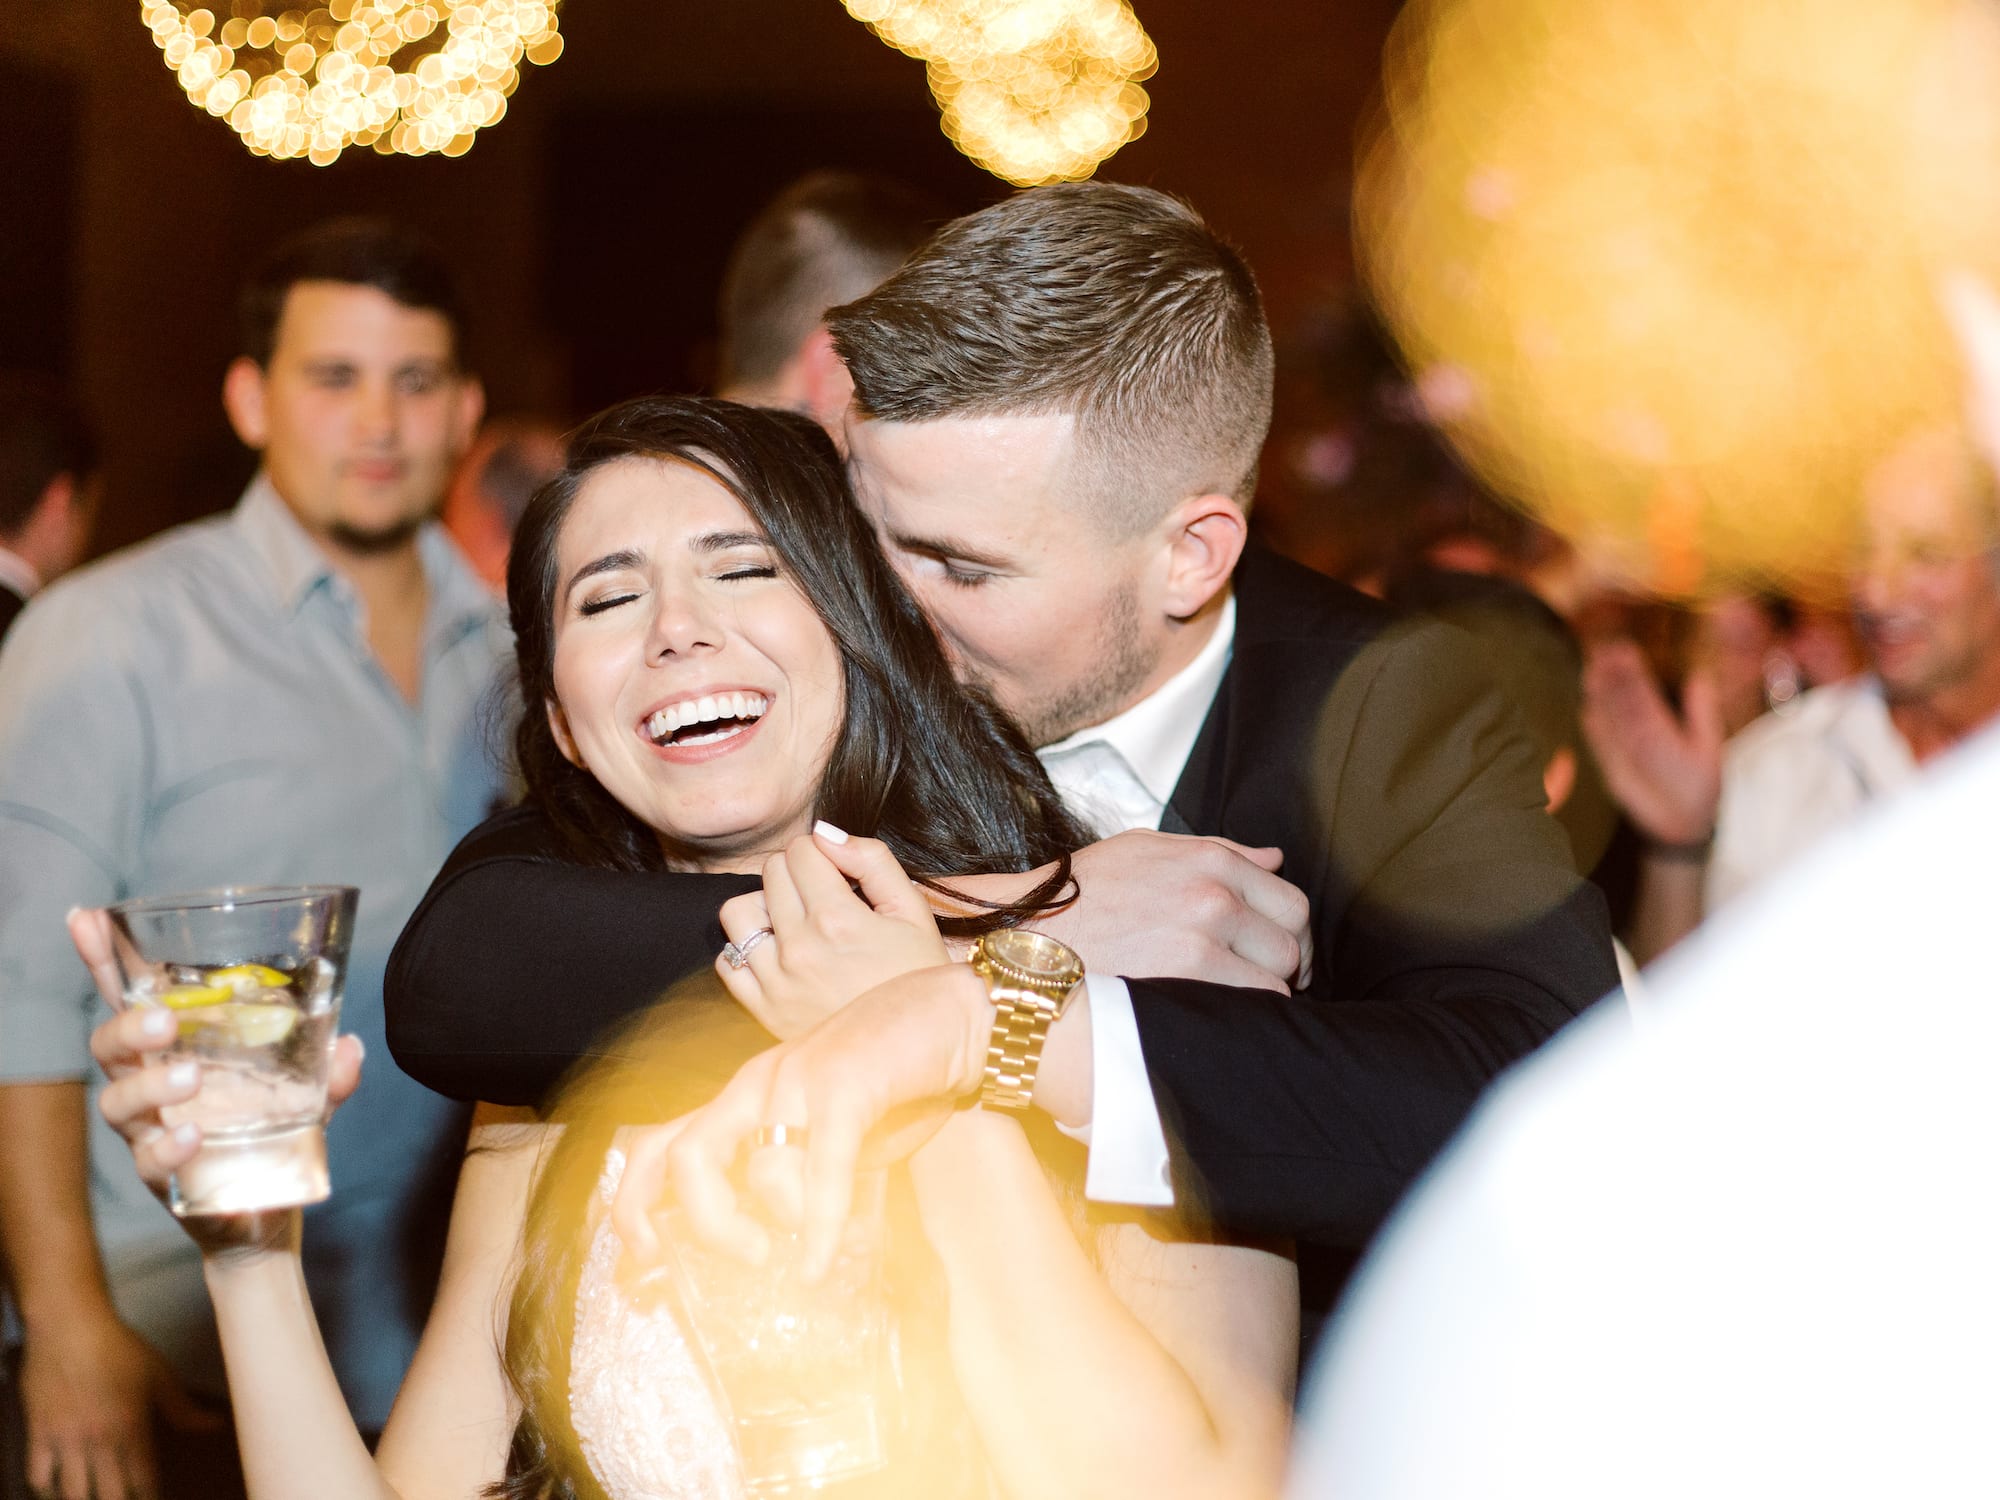 Charles Morris Center wedding reception, with a must have wedding photograph by J.J. Au'Clair. Authentic laughter on your wedding day and candids during the reception are a must!